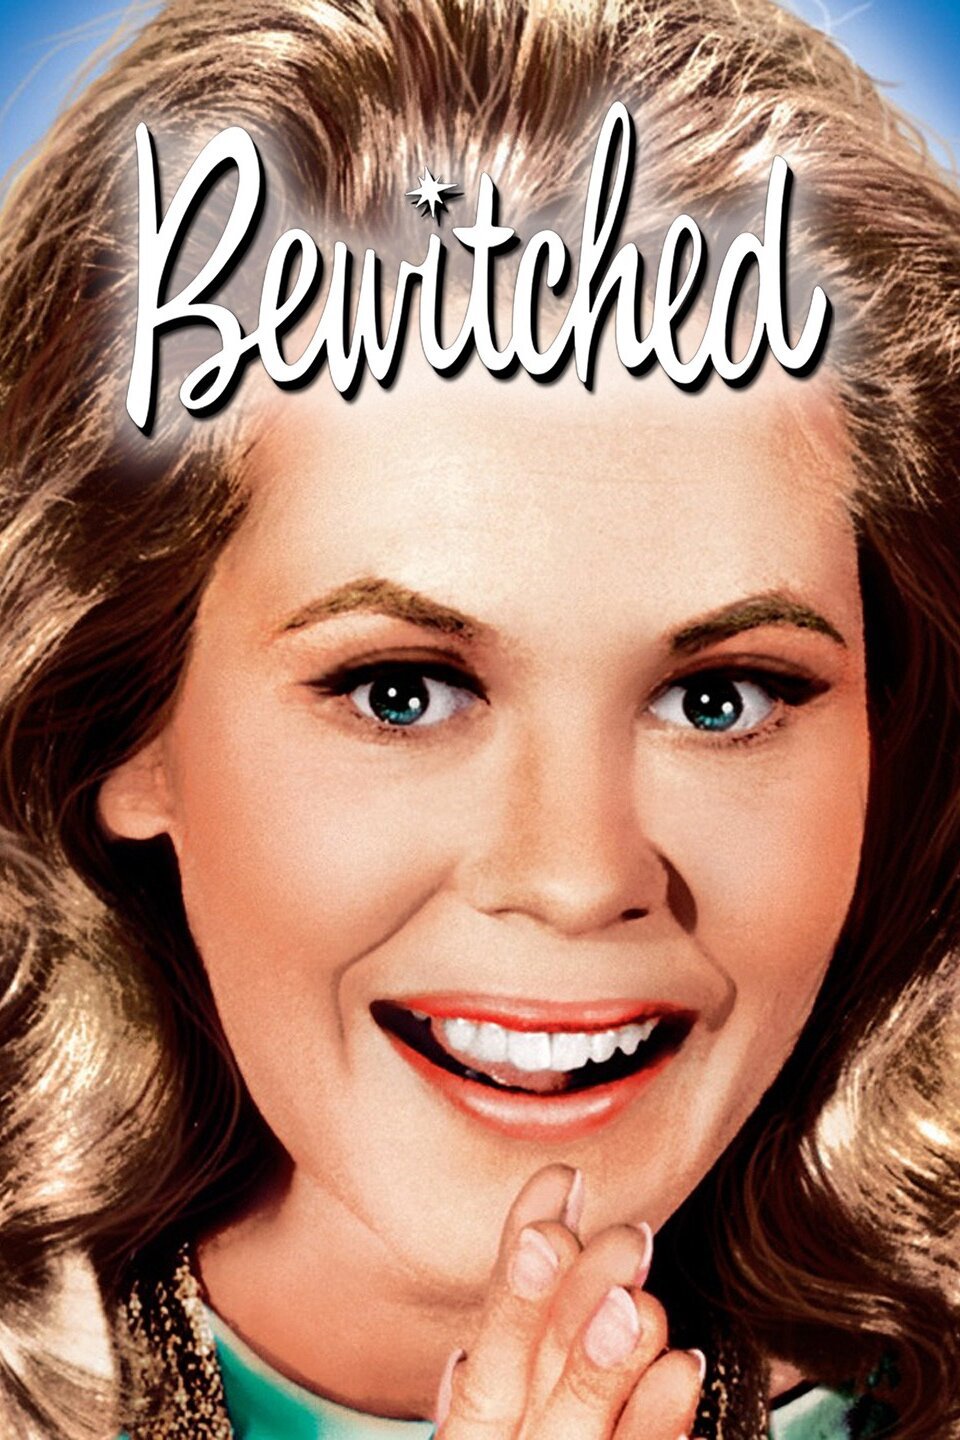 Bewitched Housewives Movie